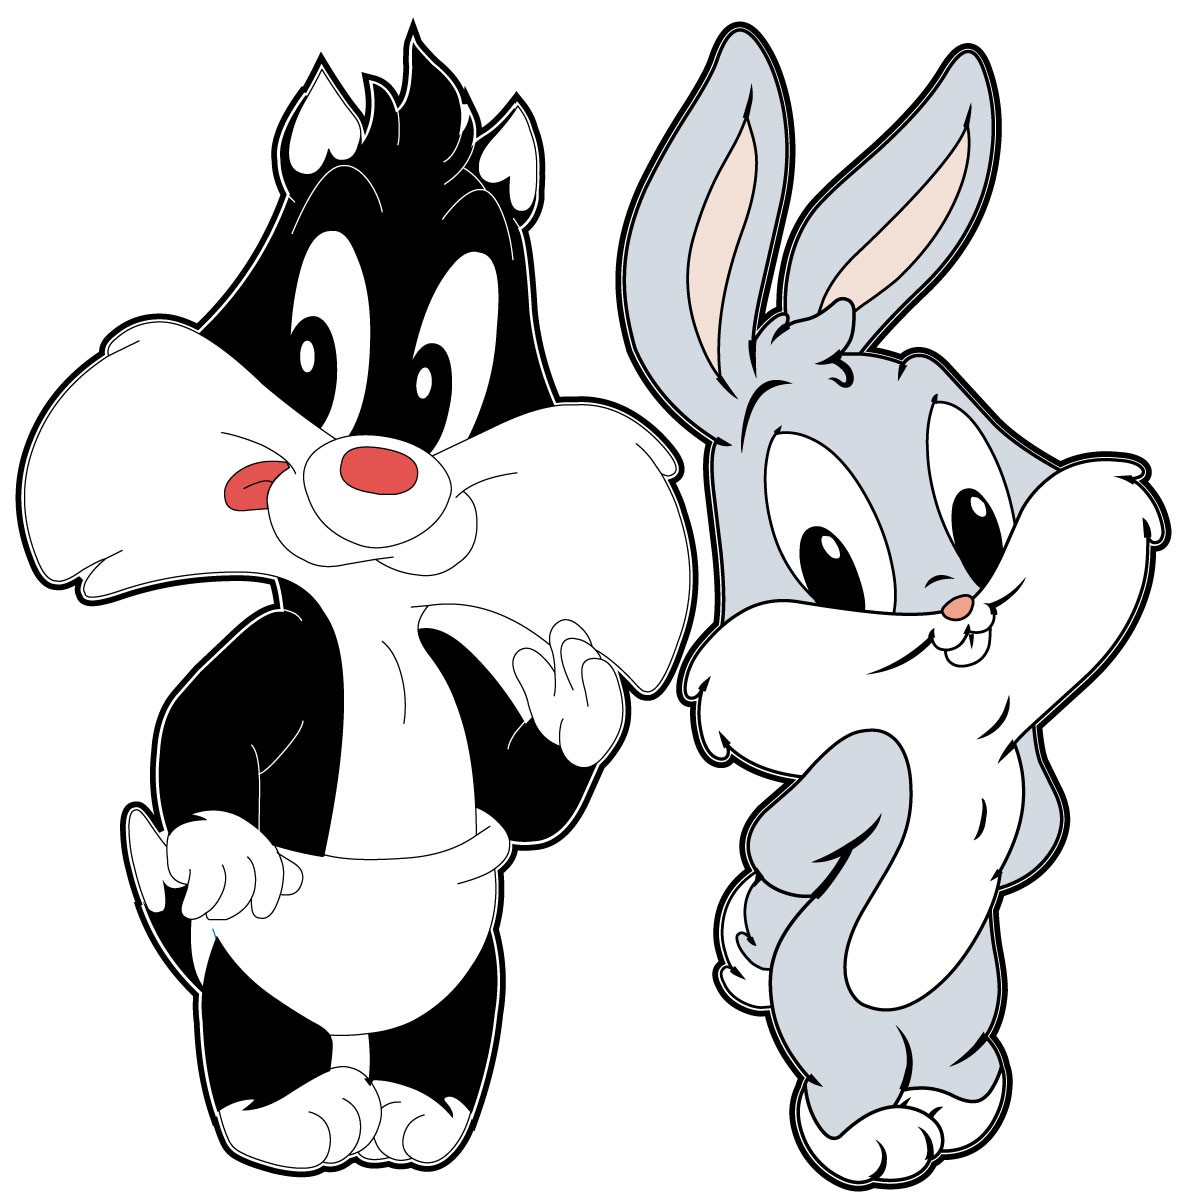 Baby Sylvester And Baby Bugs Bunny - Bugs Bunny Sylvester Looney Tunes -  1192x1200 Wallpaper 